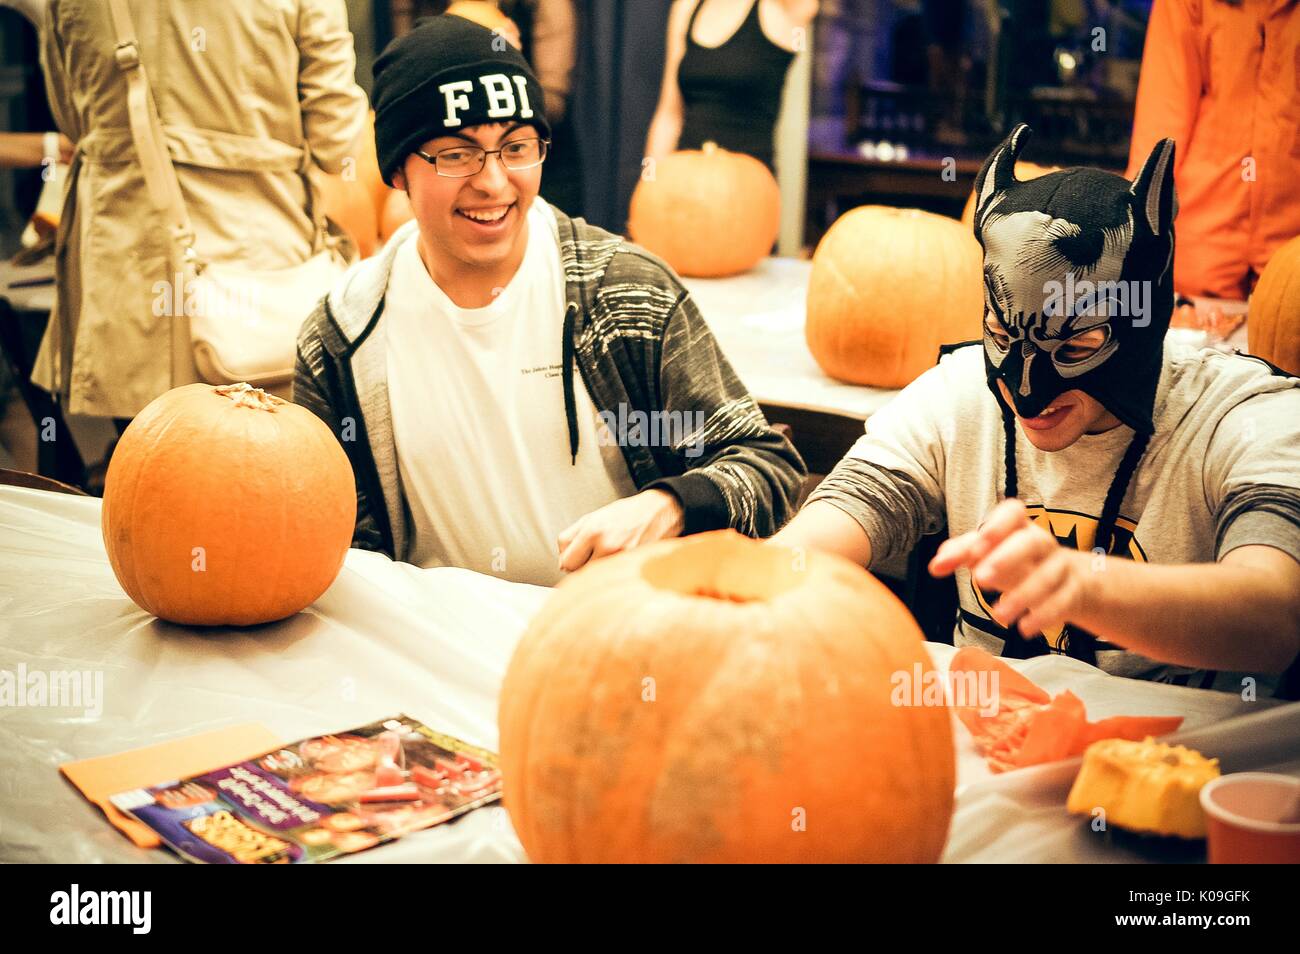 Two college students are sitting at a table each with a pumpkin, one is carving their pumpkin and the other pumpkin has not been touched yet, the students are smiling and are also in costume, one is wearing an FBI hat and the other is wearing a Batman hat and mask, Halloween at Johns Hopkins University's George Peabody Library, 2015. Courtesy Eric Chen. Stock Photo